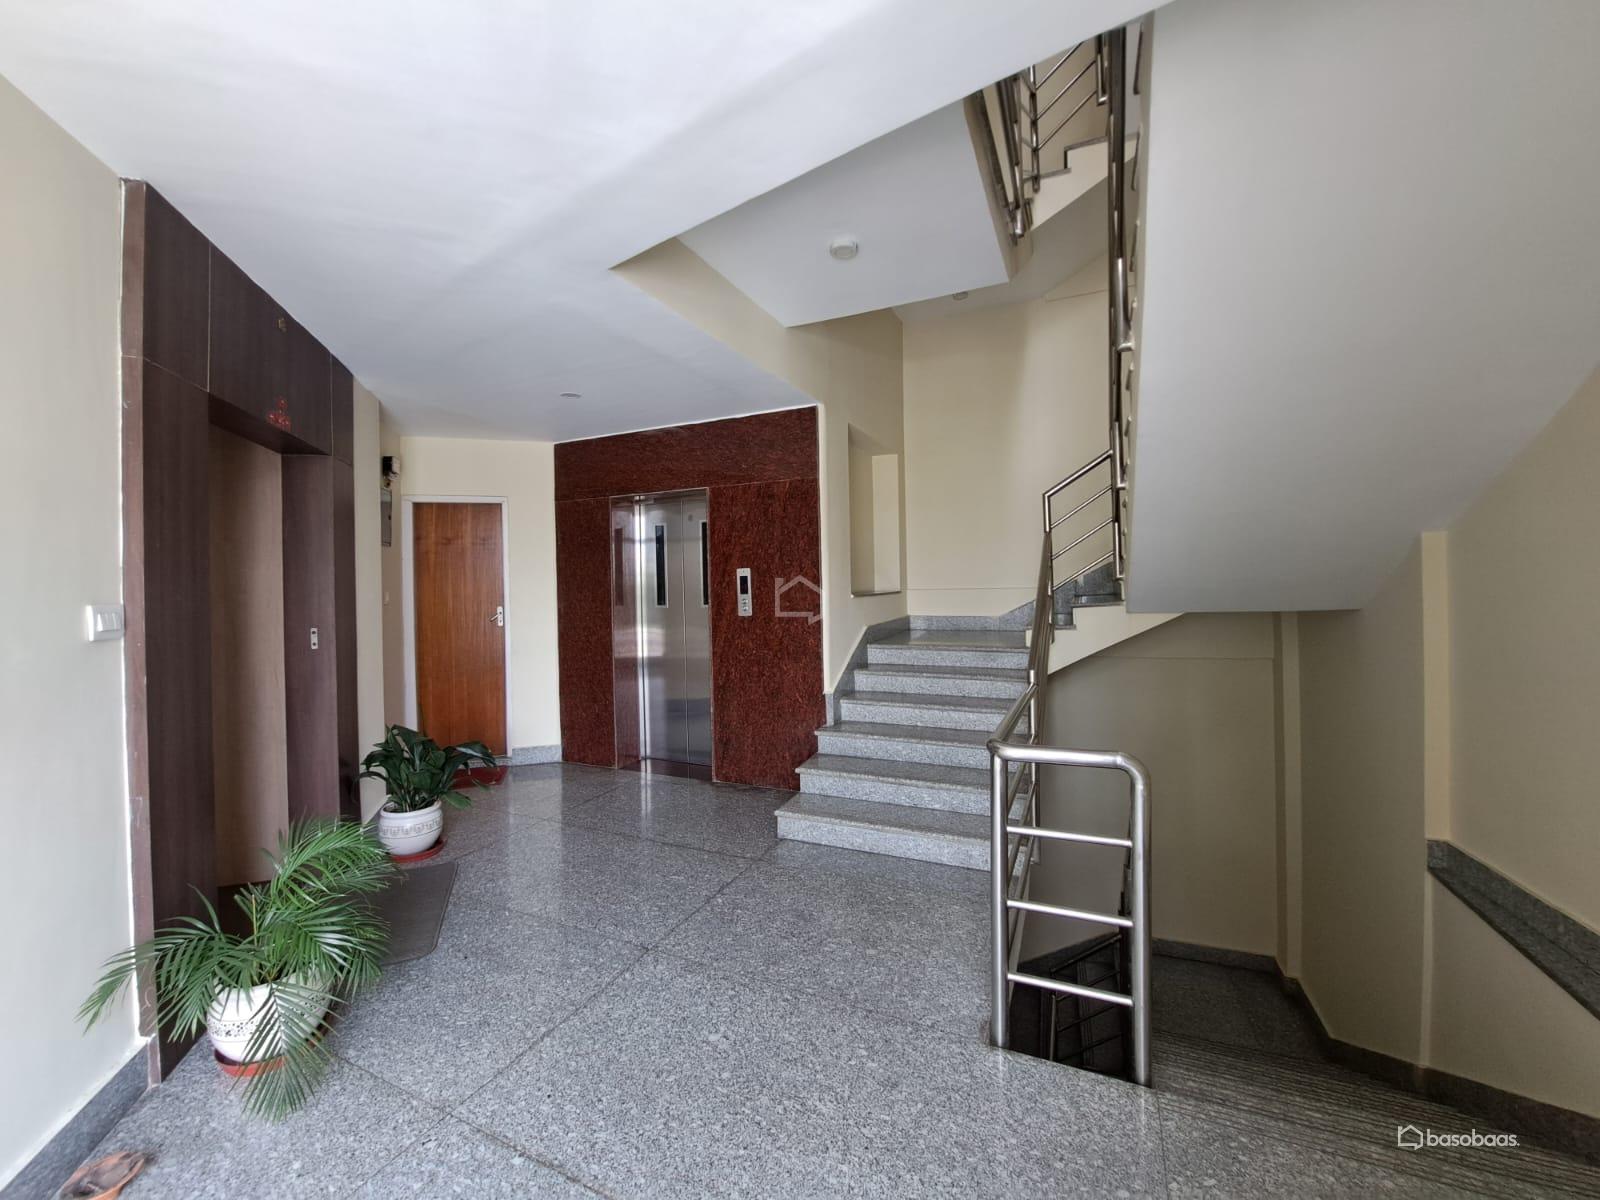 COMMERCIAL : Office Space for Rent in Baneshwor, Kathmandu Image 8